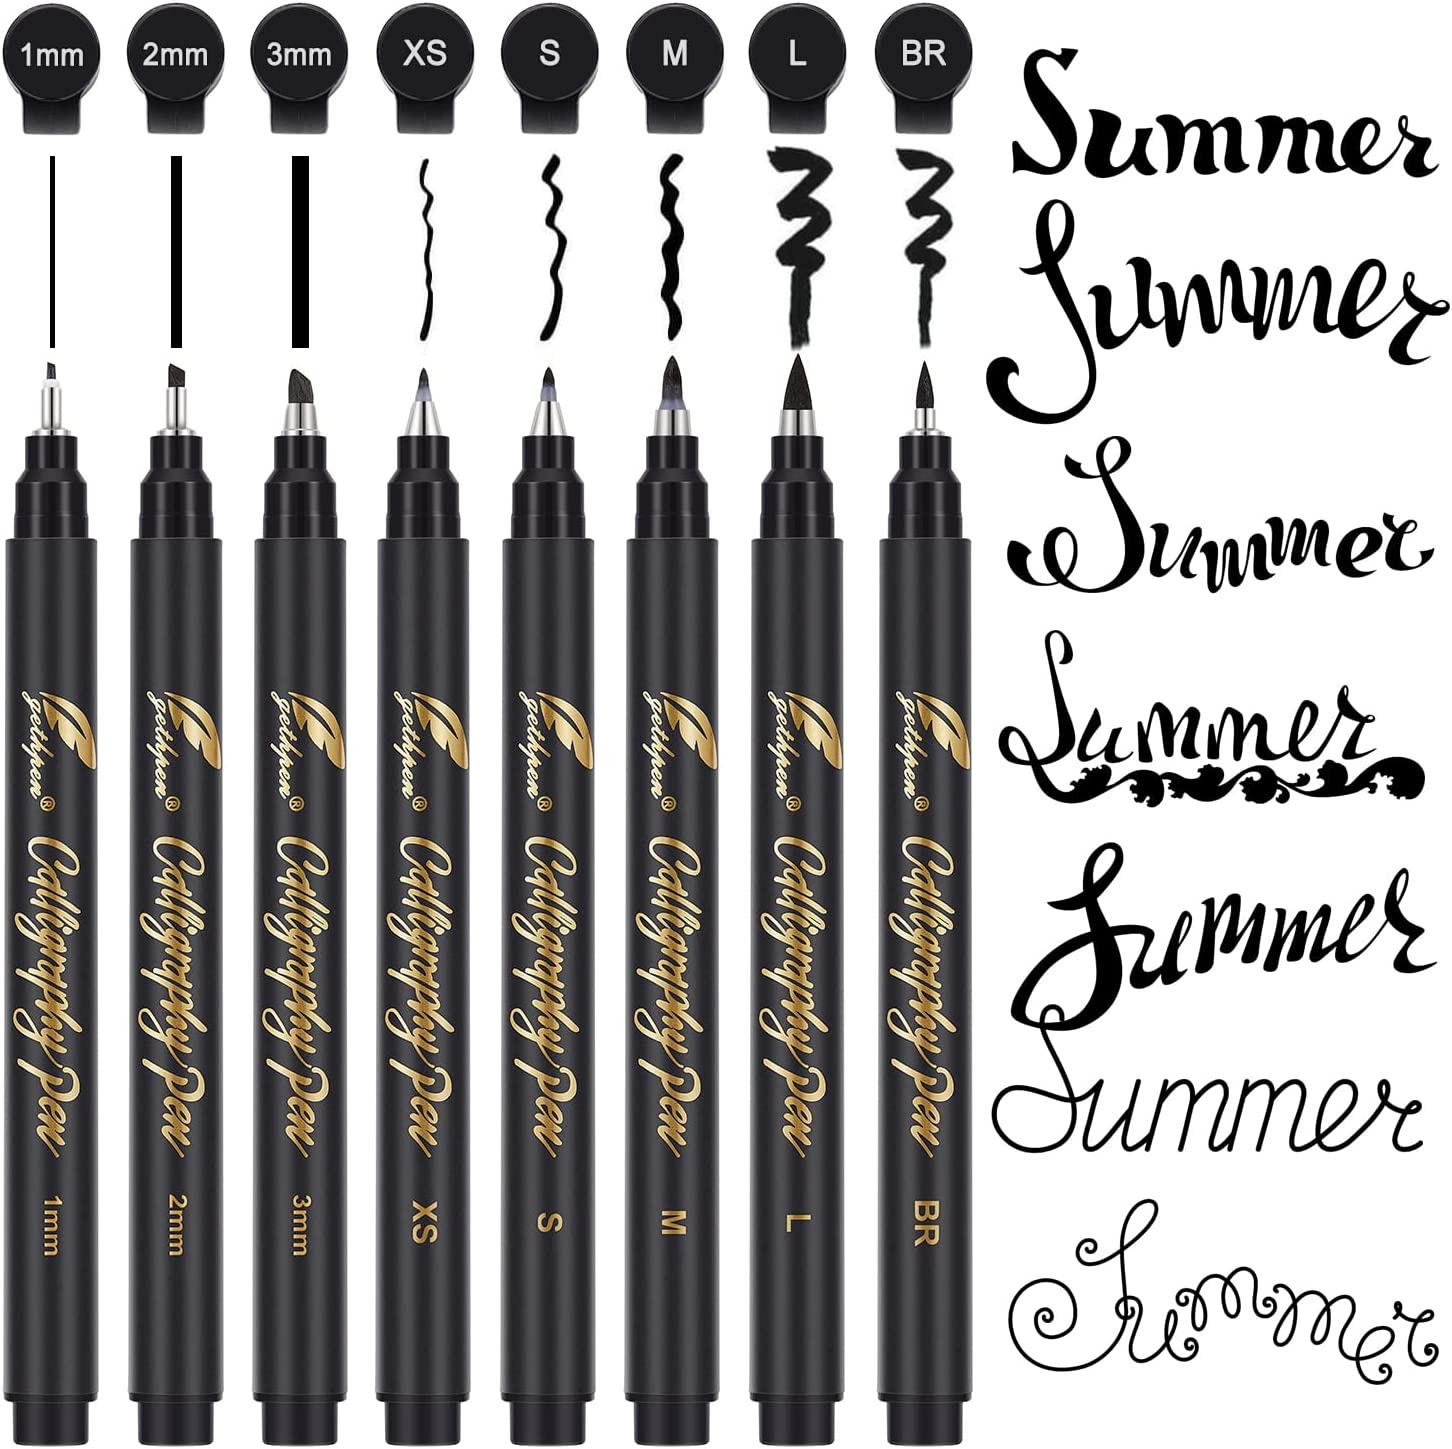 Calligraphy Pens, Hand Lettering Pens, 8 Size Calligraphy Pens for Writing, Brus